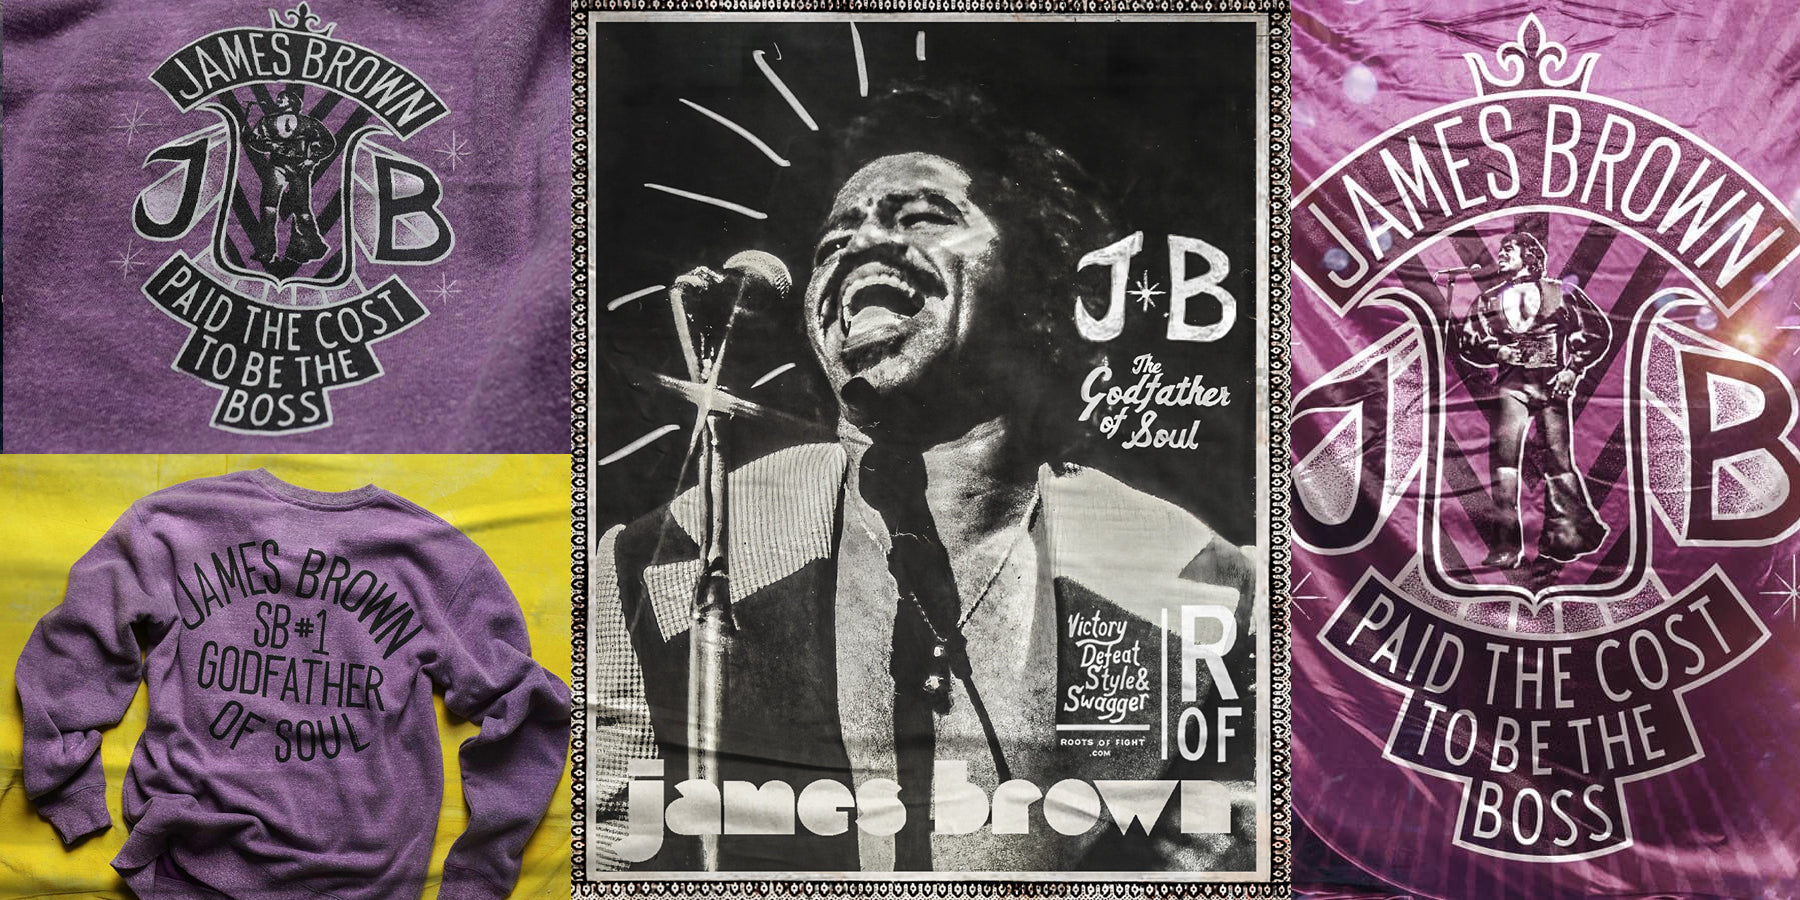 Stylized poster of James Brown singing into a microphone with text 'The Godfather of Soul' and 'Victory.'